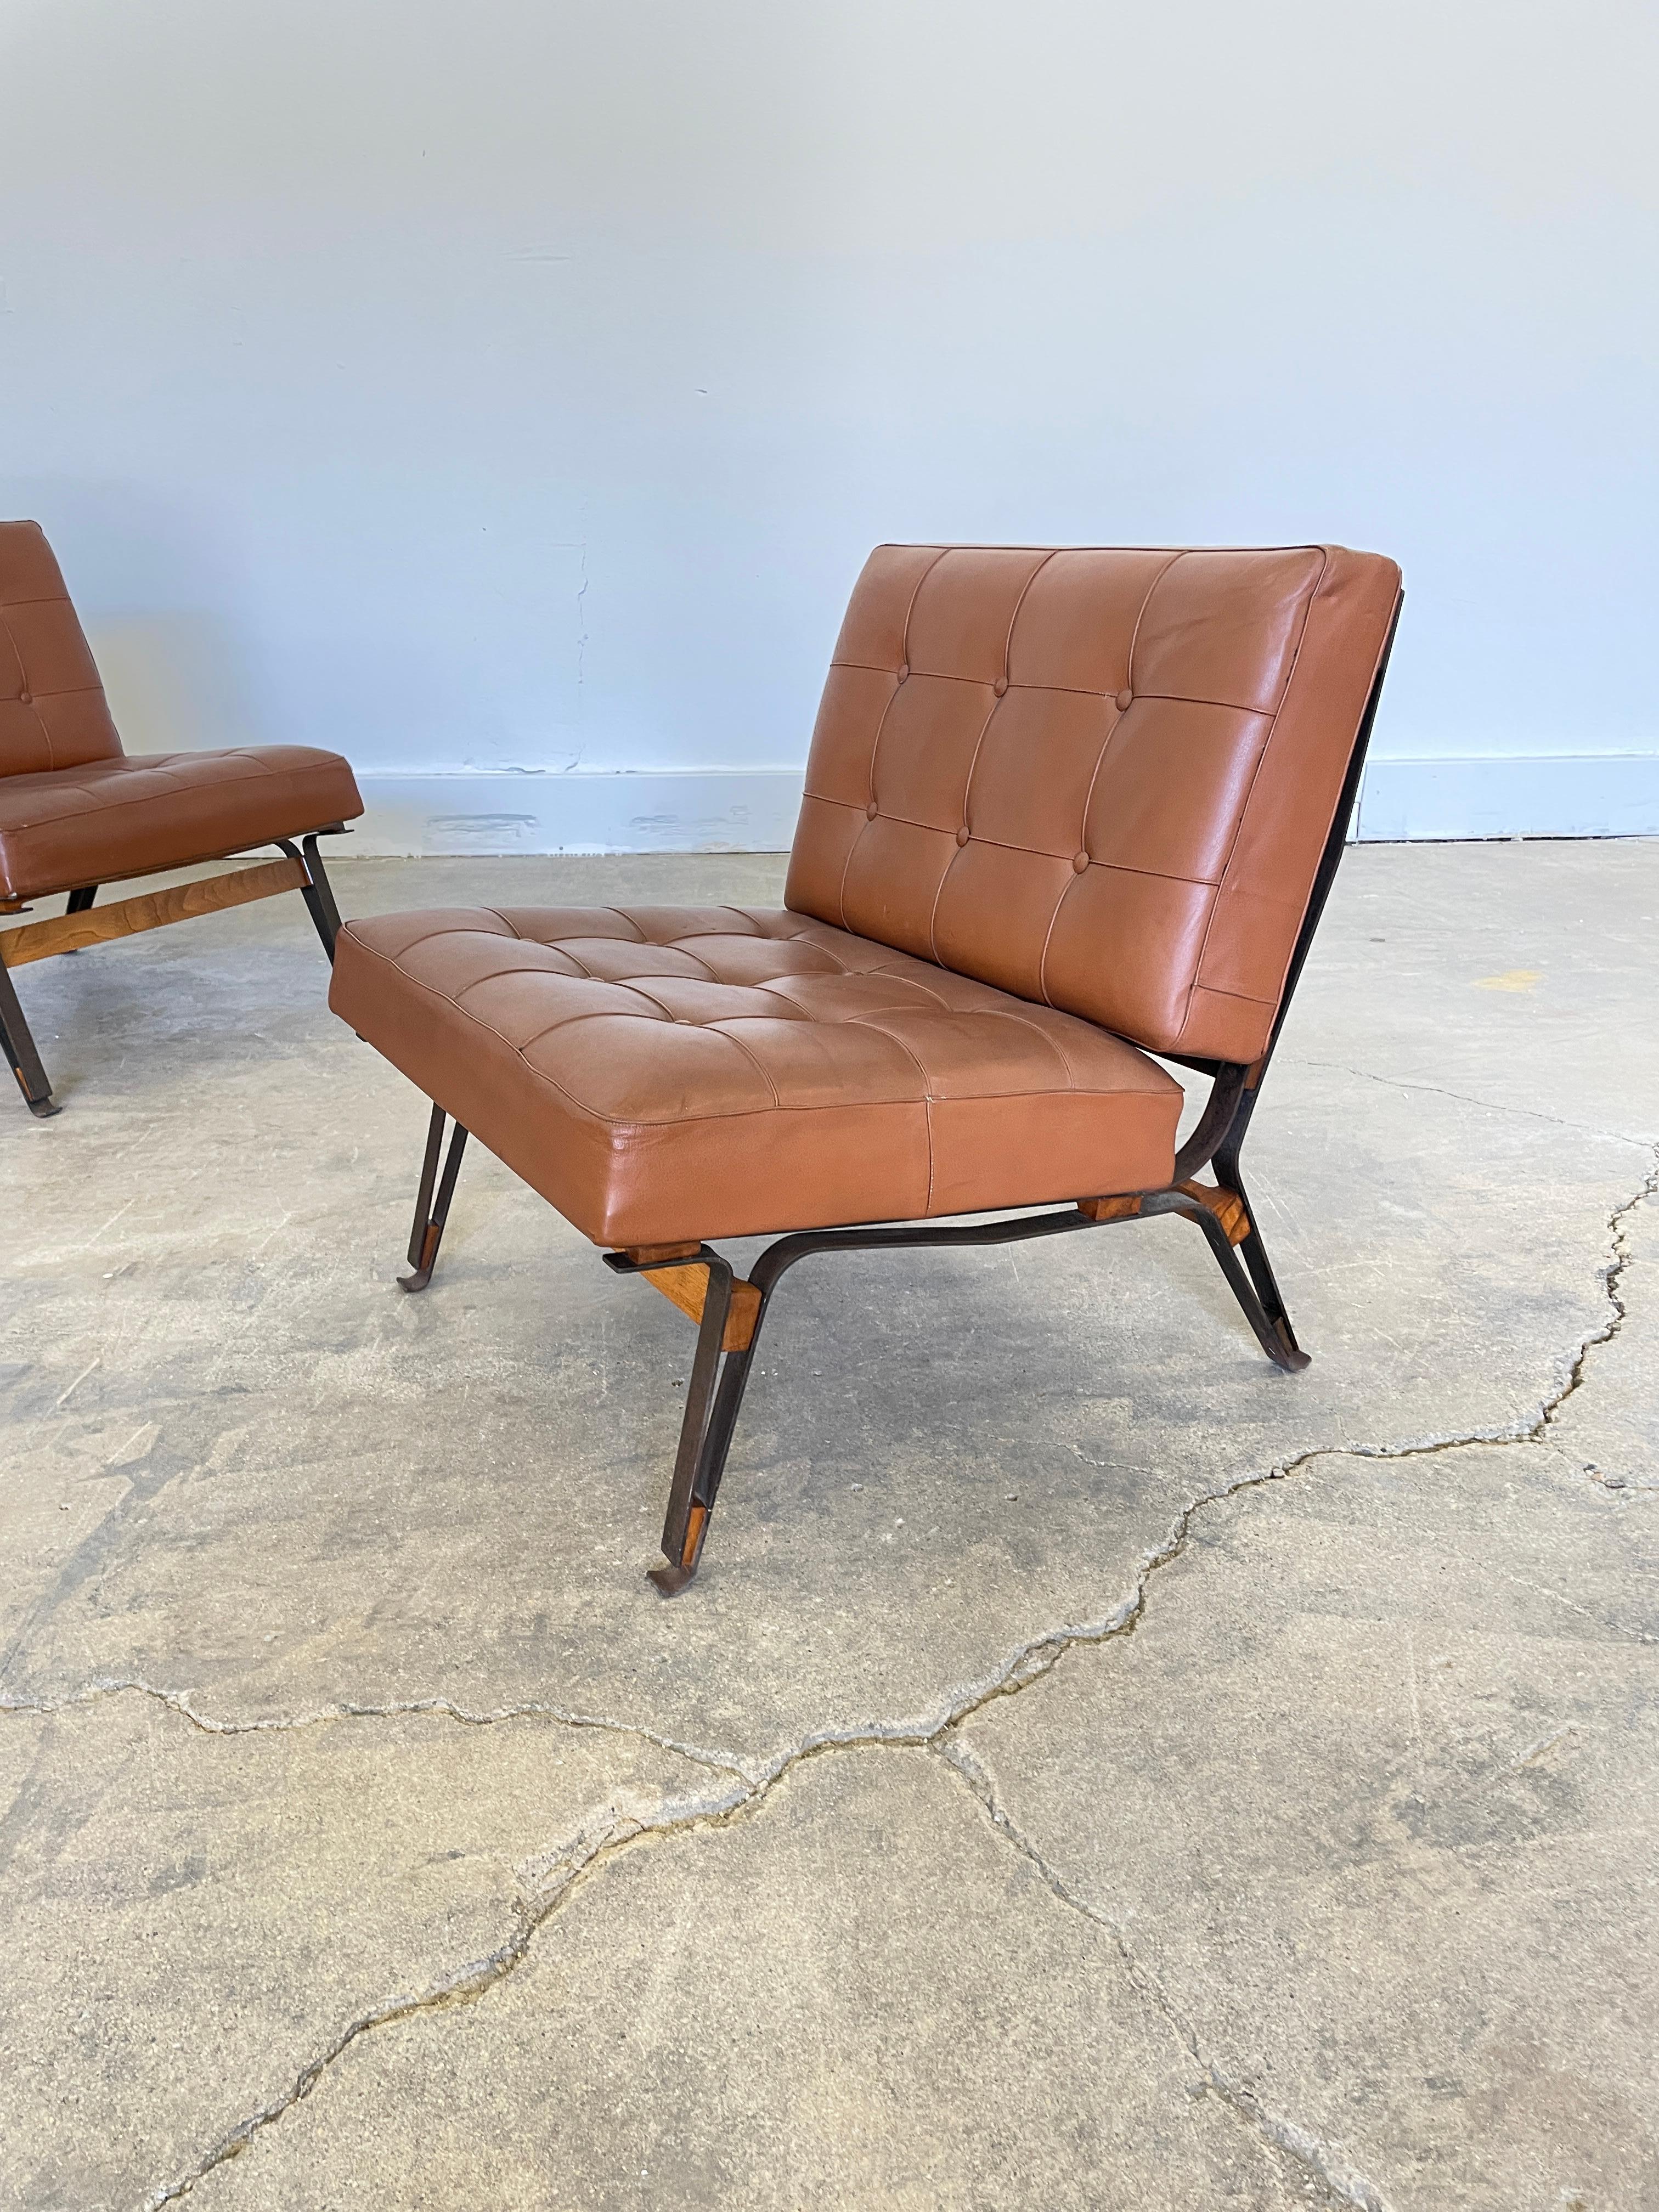 Steel Model 856 Rare Pair of Matched Leather Lounge Chairs by Ico Parisi, 1950s